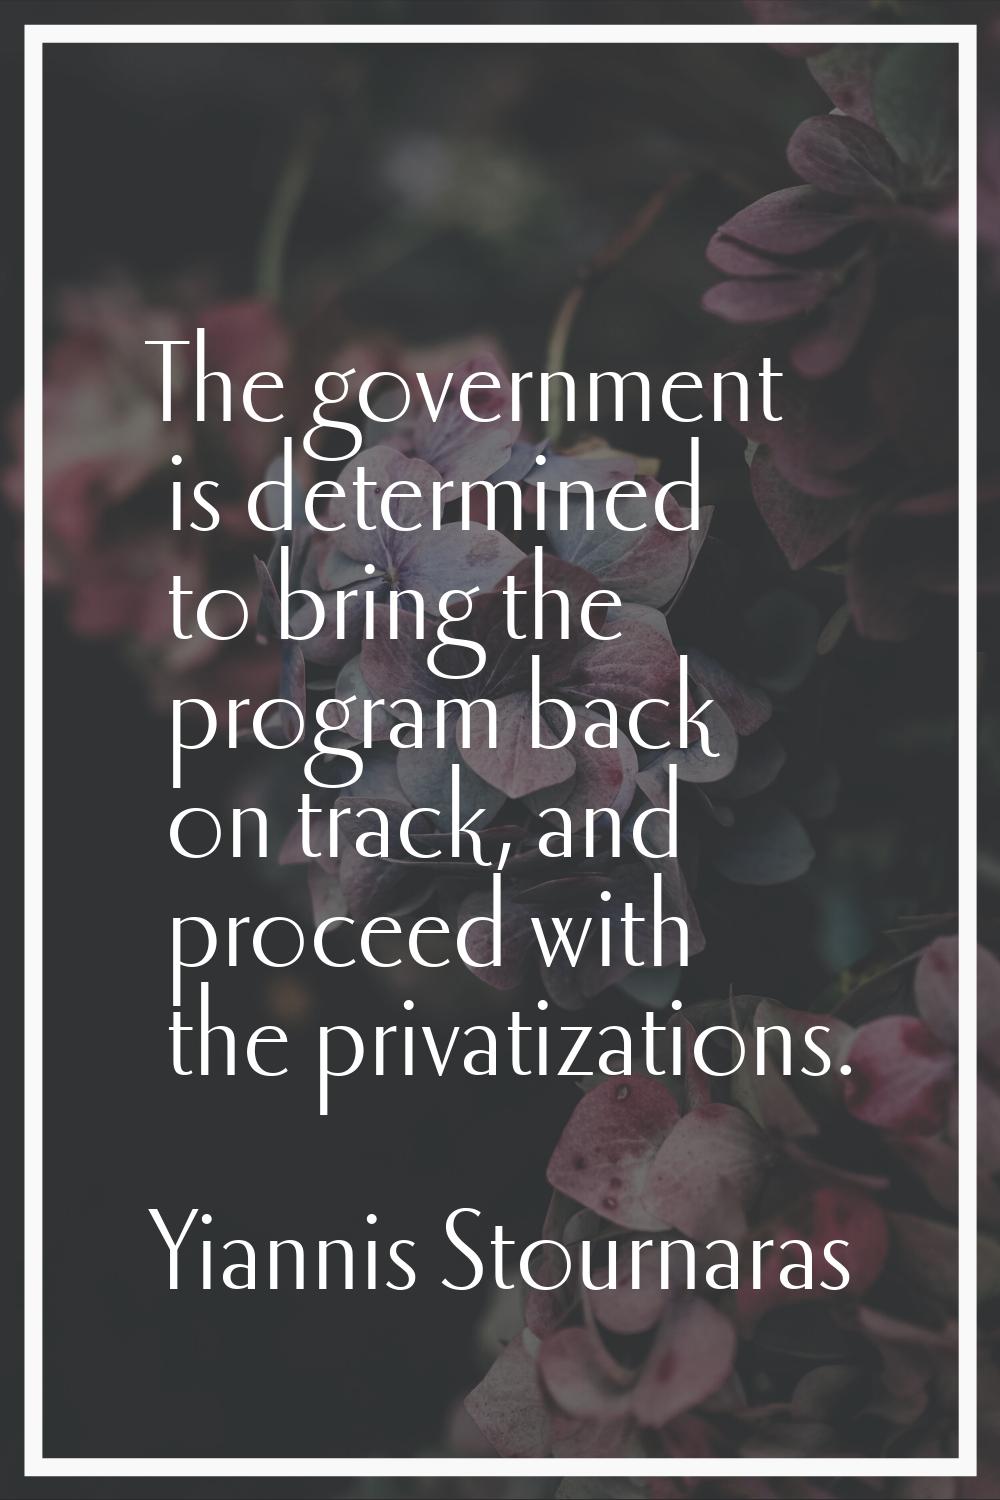 The government is determined to bring the program back on track, and proceed with the privatization